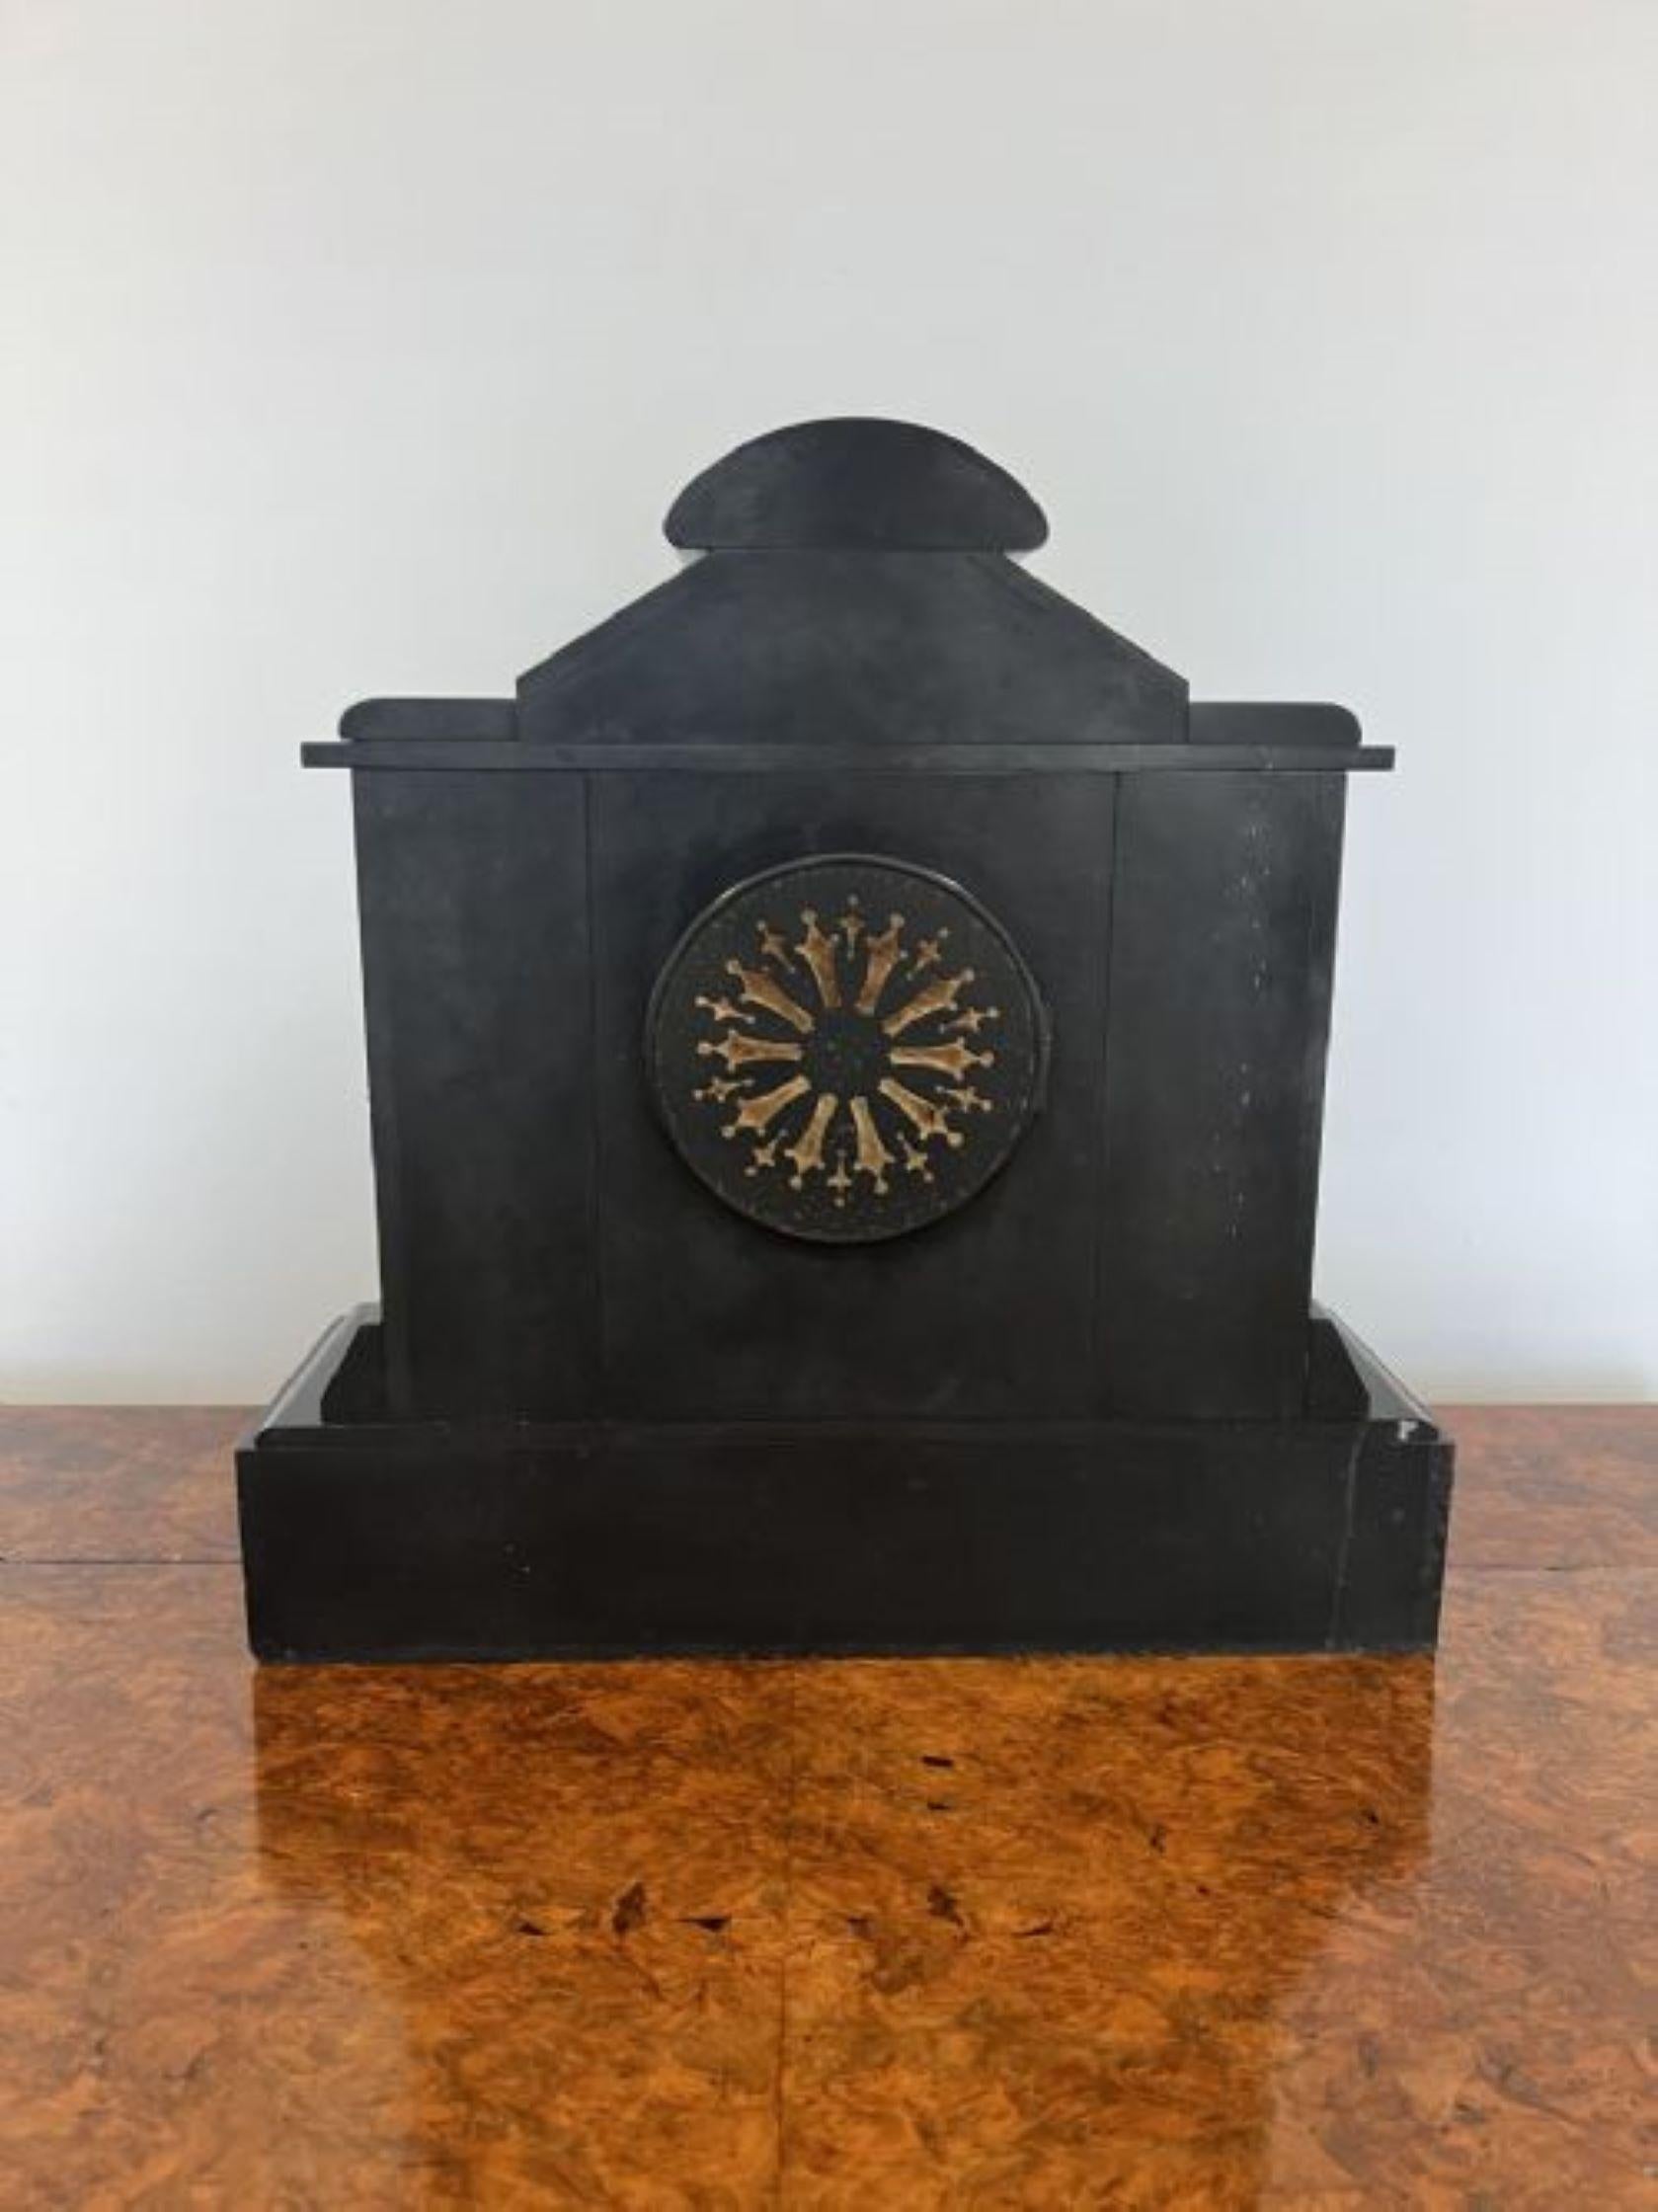 Quality antique Victorian eight day mantle clock having a quality black slate and grey marble cased mantel clock, with a brass bezel and the original hands with Arabic numerals having an eight day movement striking the hour and half hour on a gong.